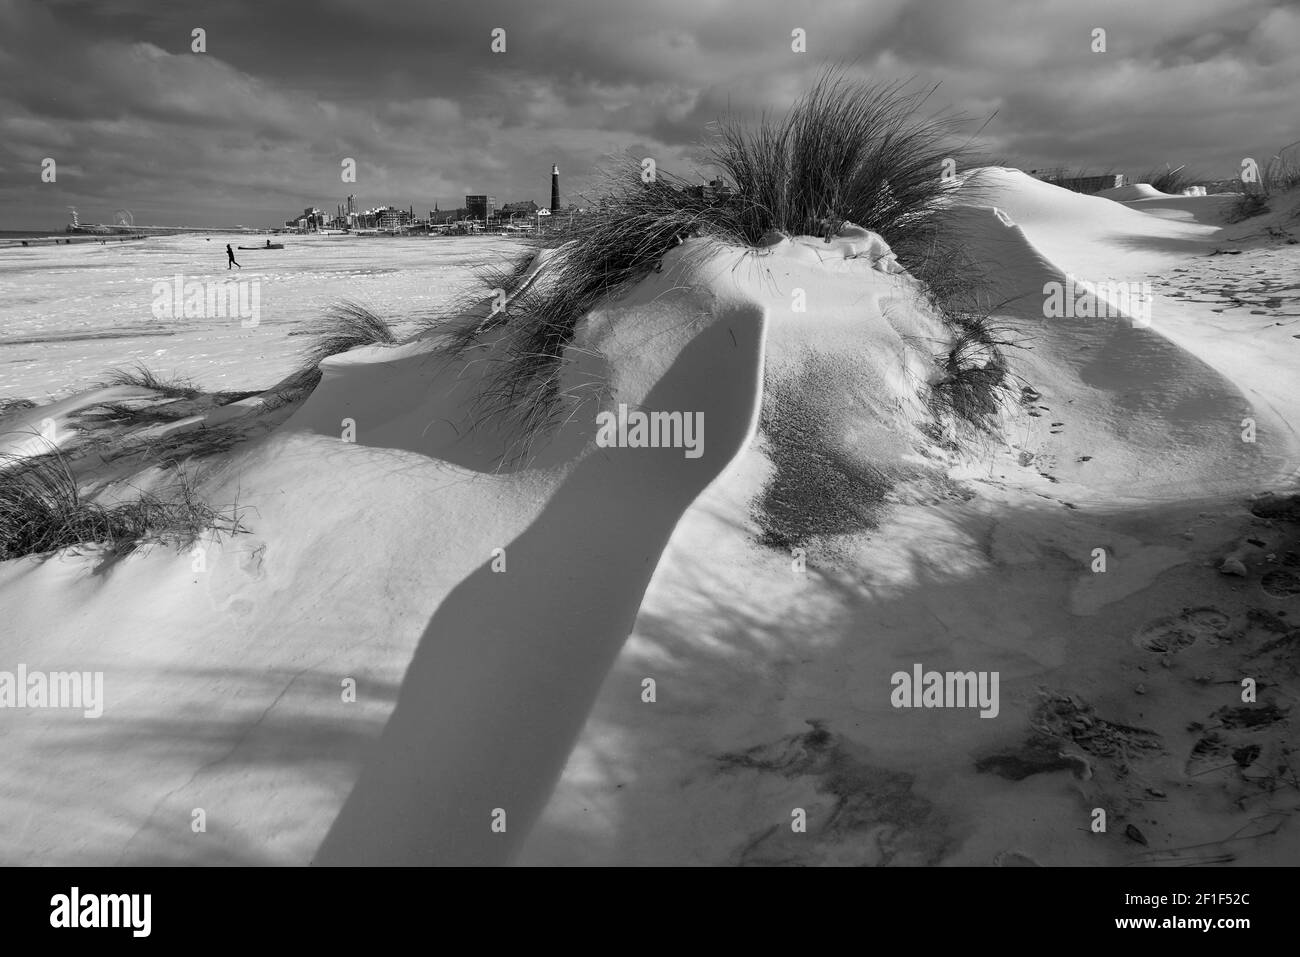 Snow on the beach after heavy snowfall across the country. Stock Photo